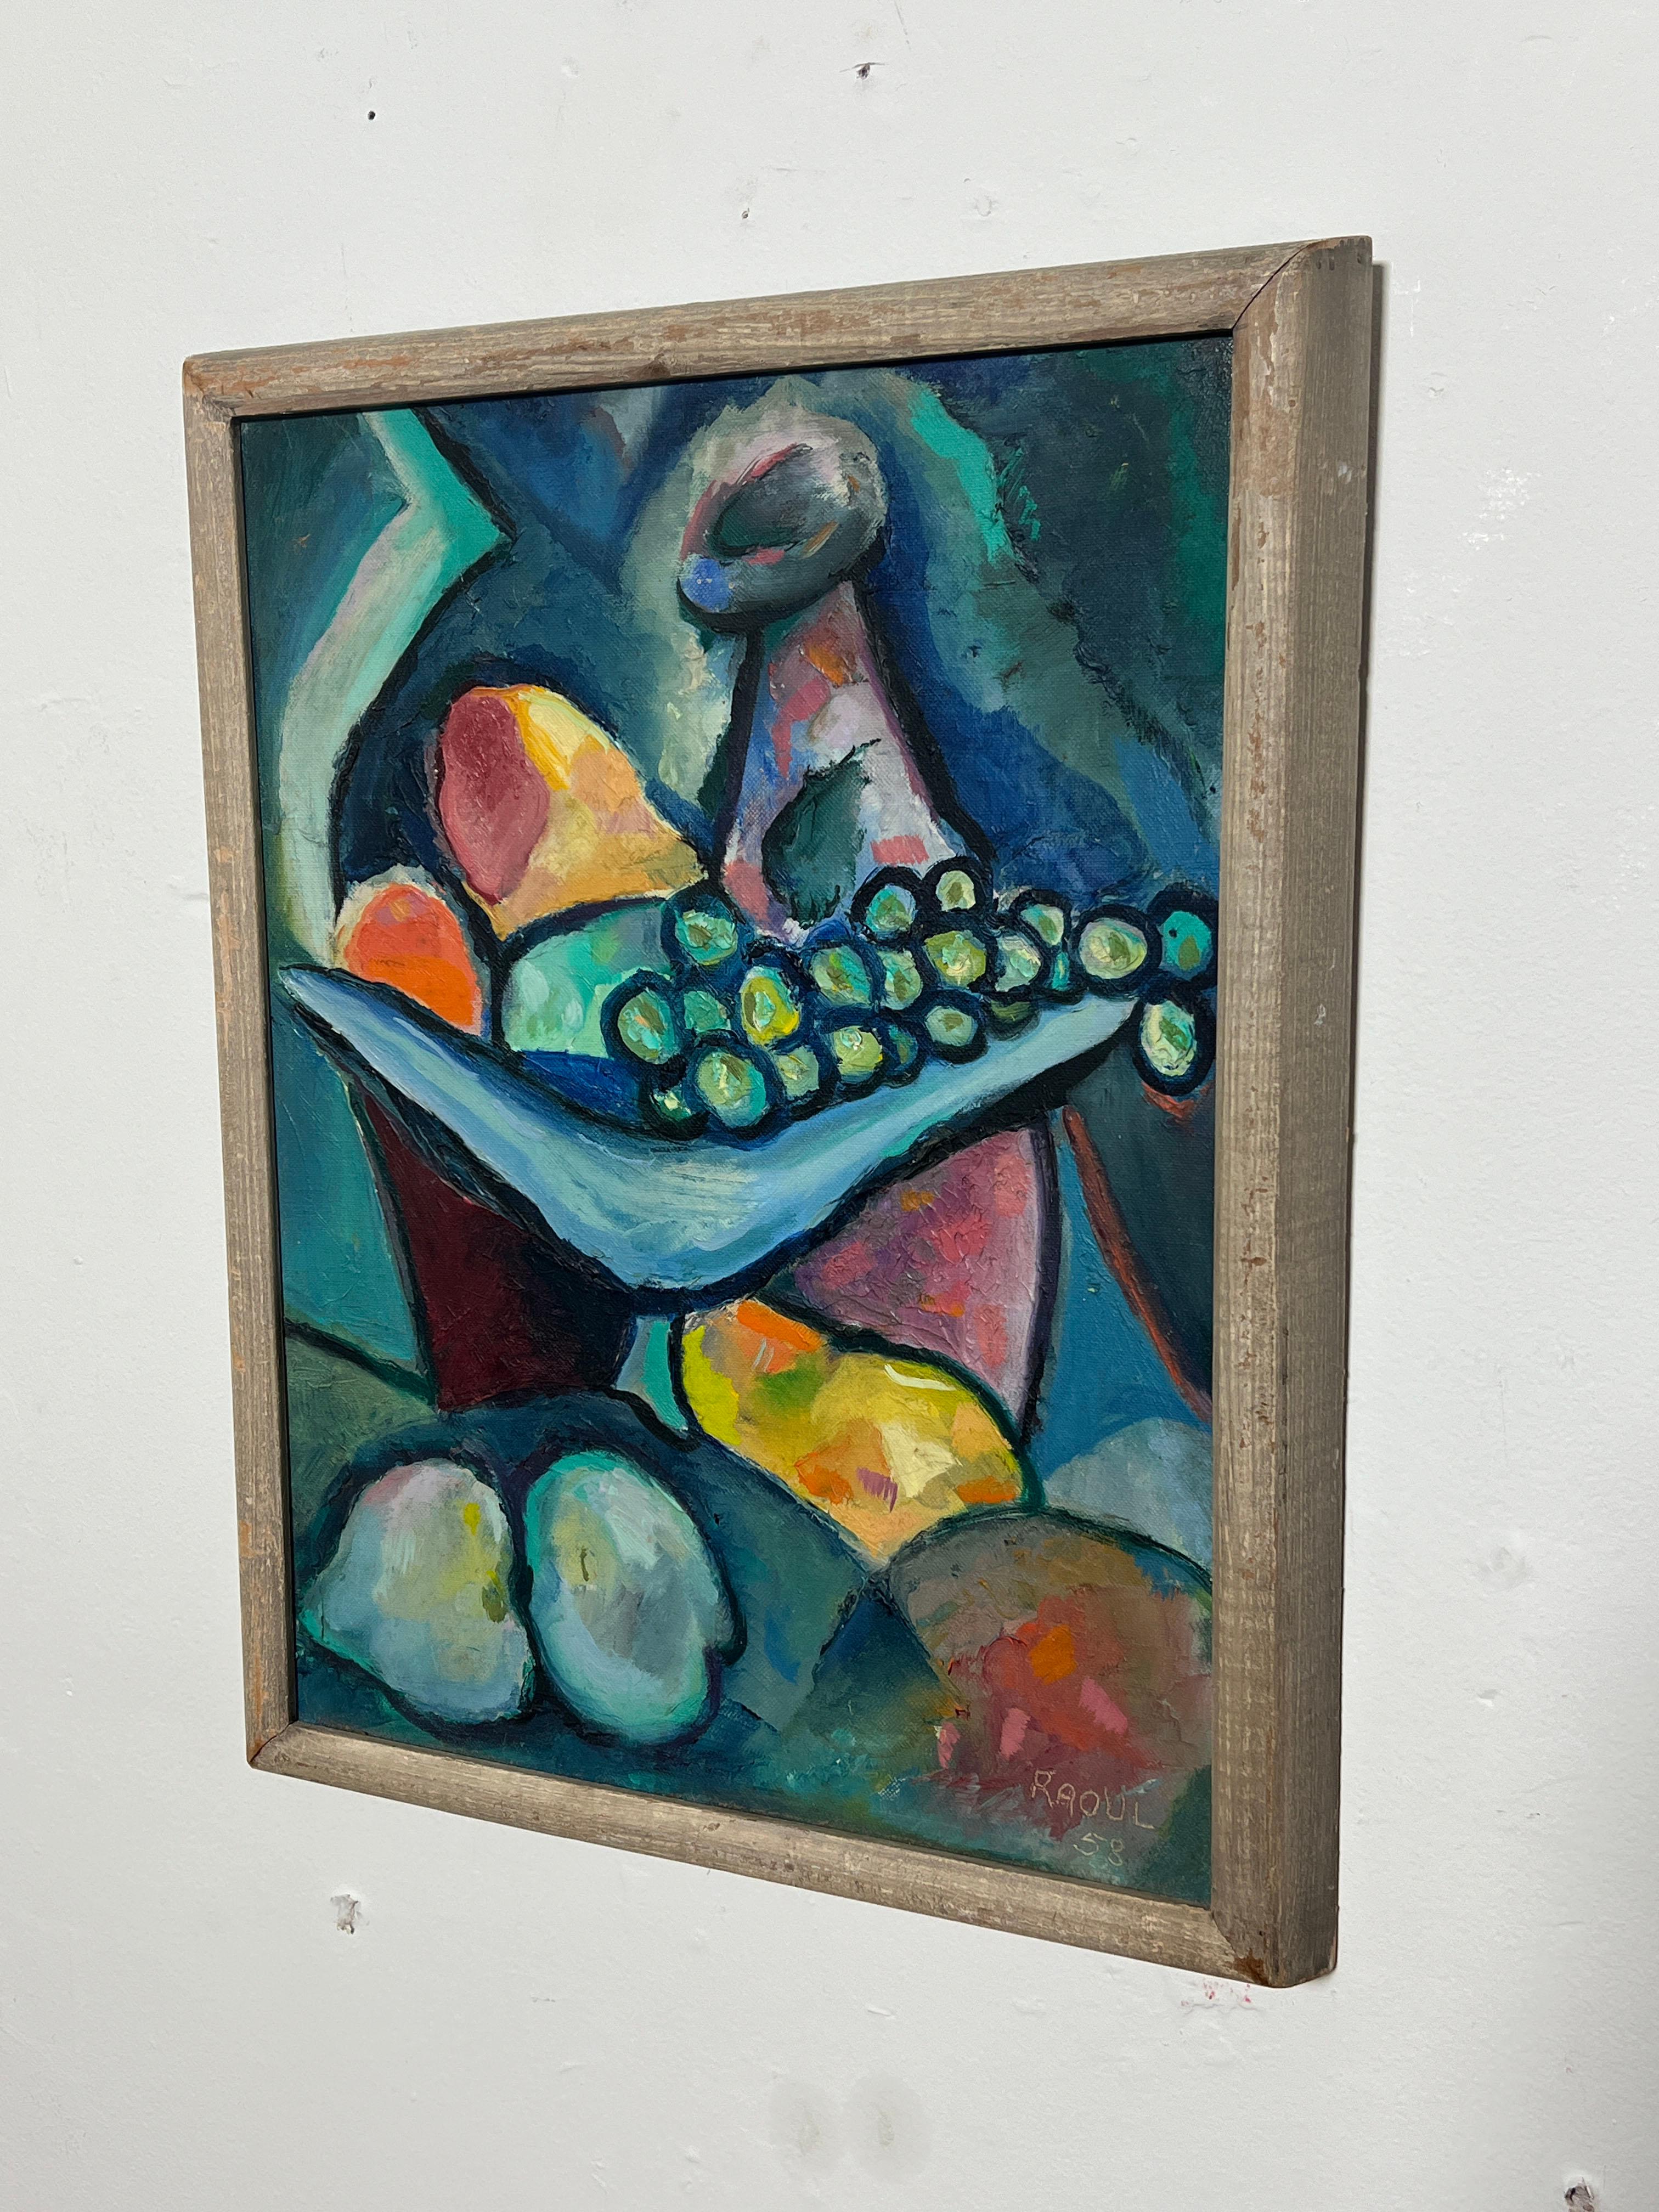 Modernist still life oil on canvas board in stained glass / jewel like tones, signed Raoul and dated 1958.